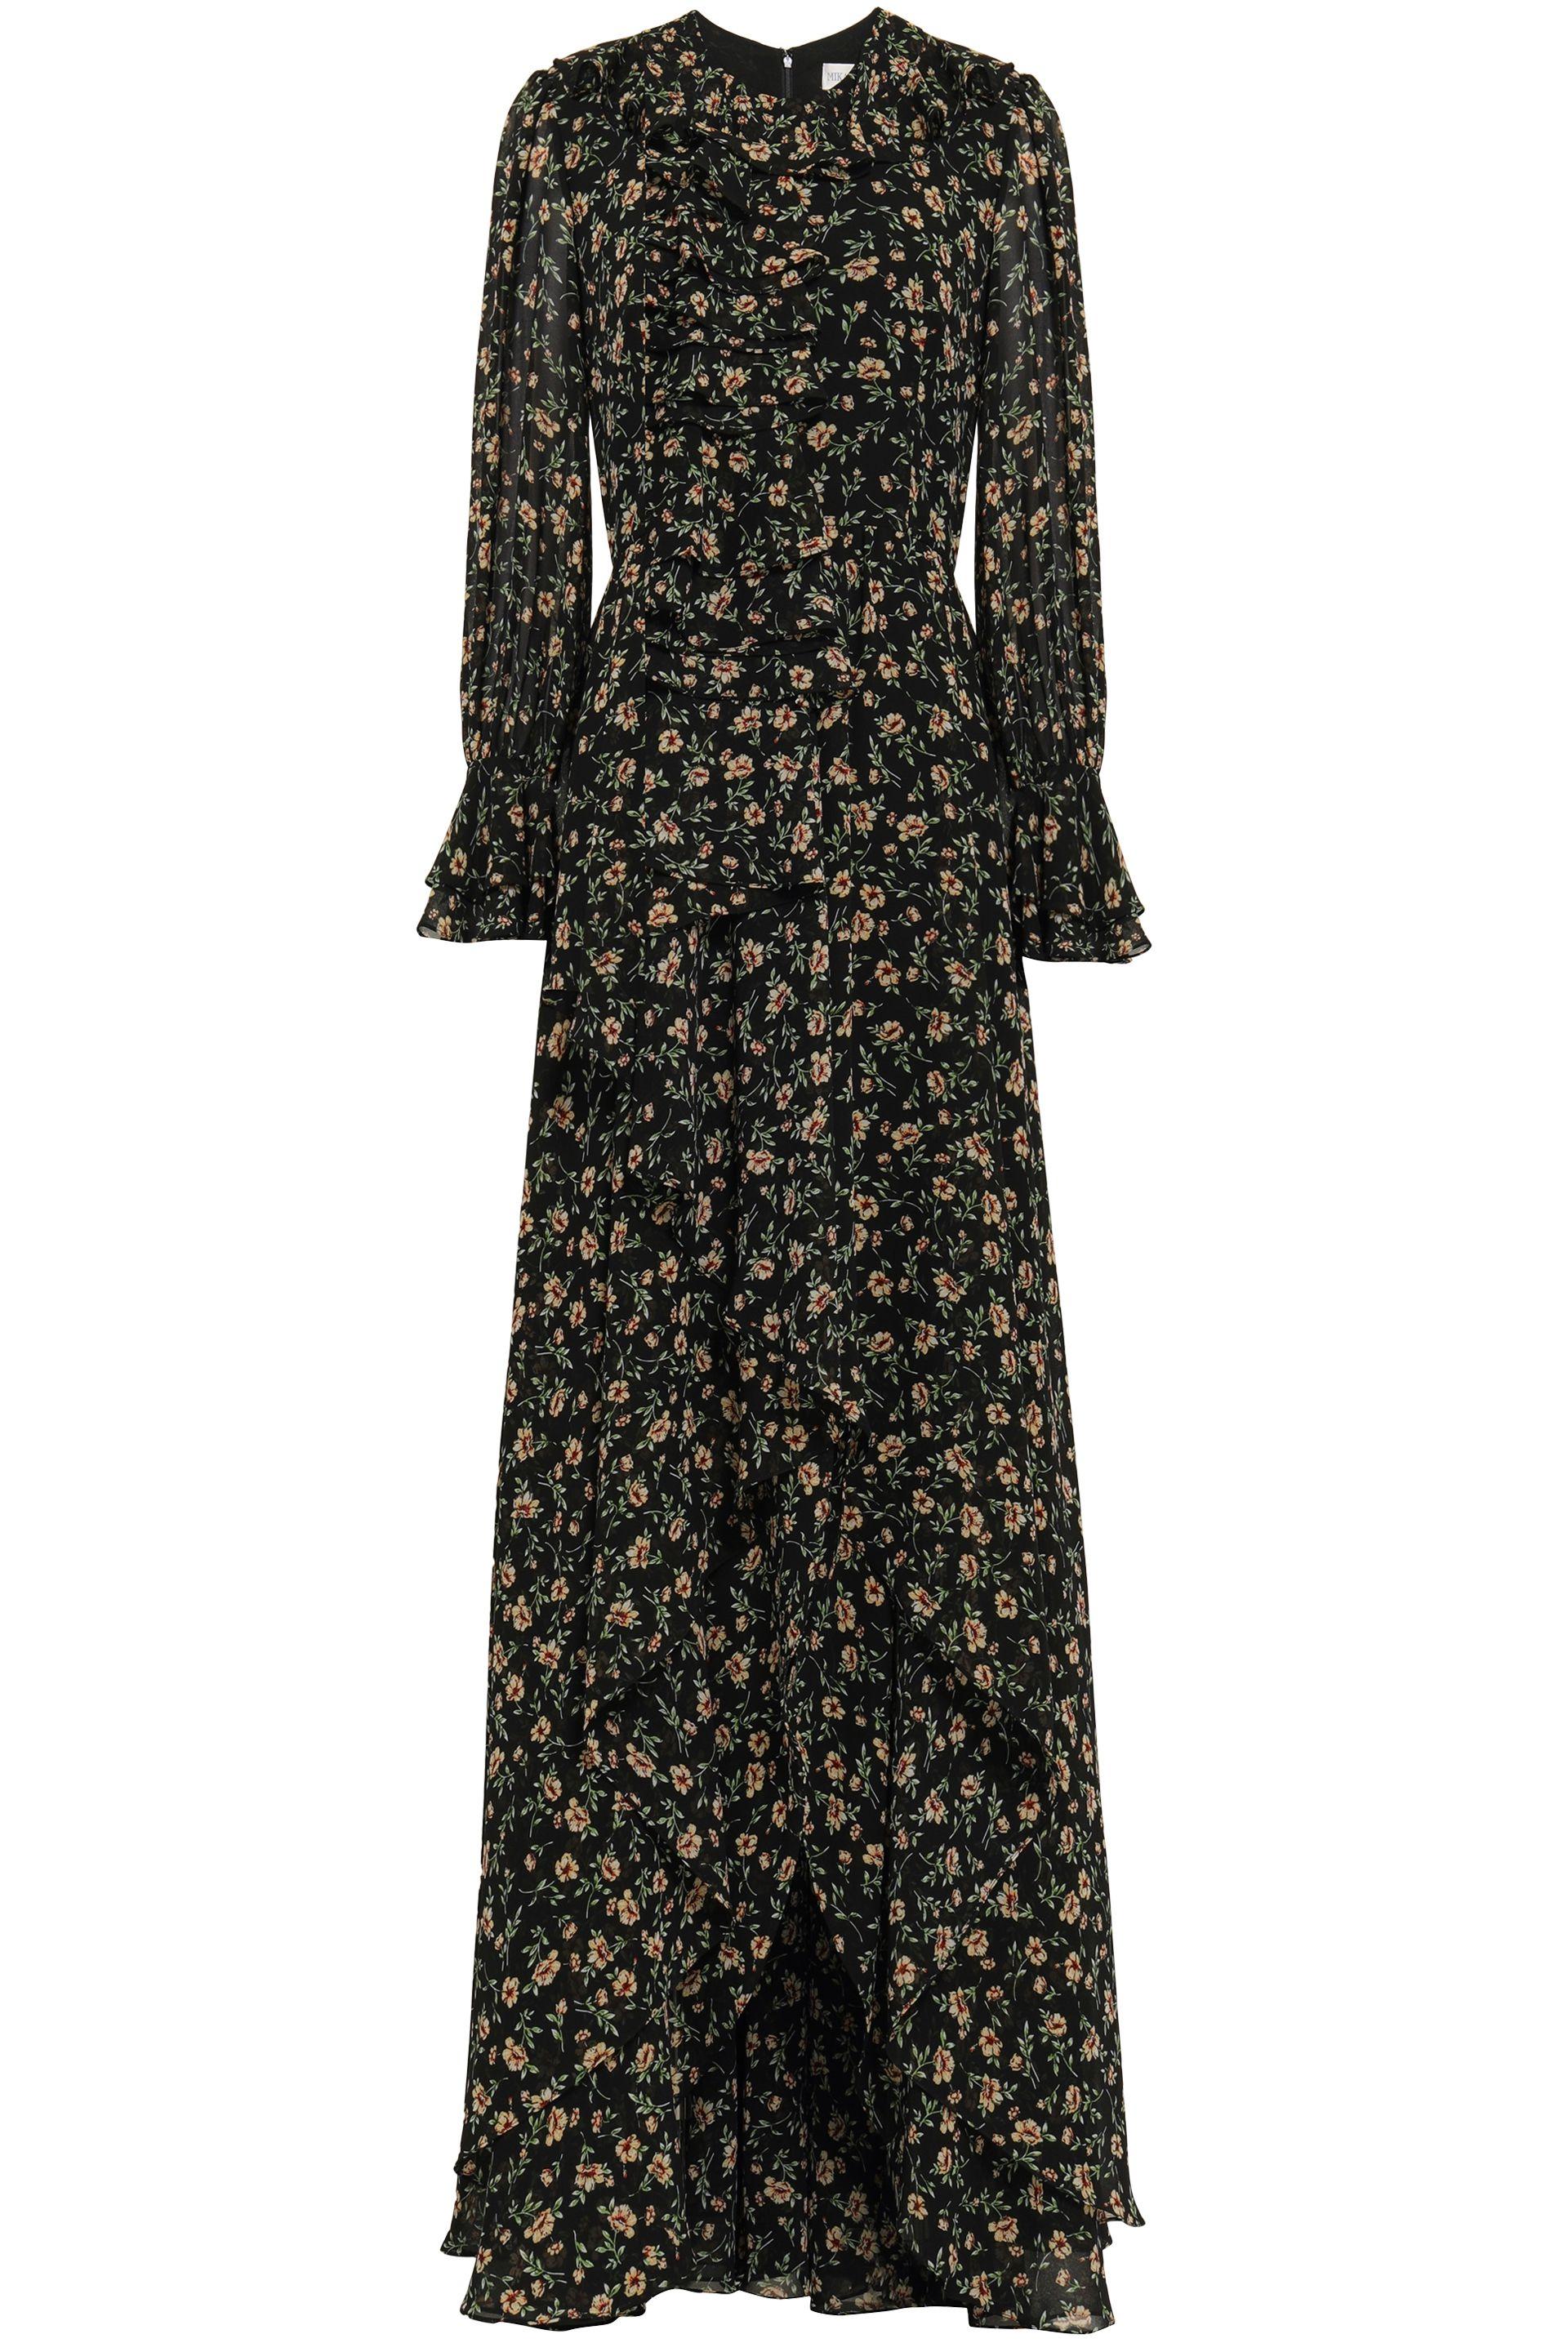 Lyst - Mikael Aghal Woman Ruffled Floral-print Georgette Maxi Dress ...